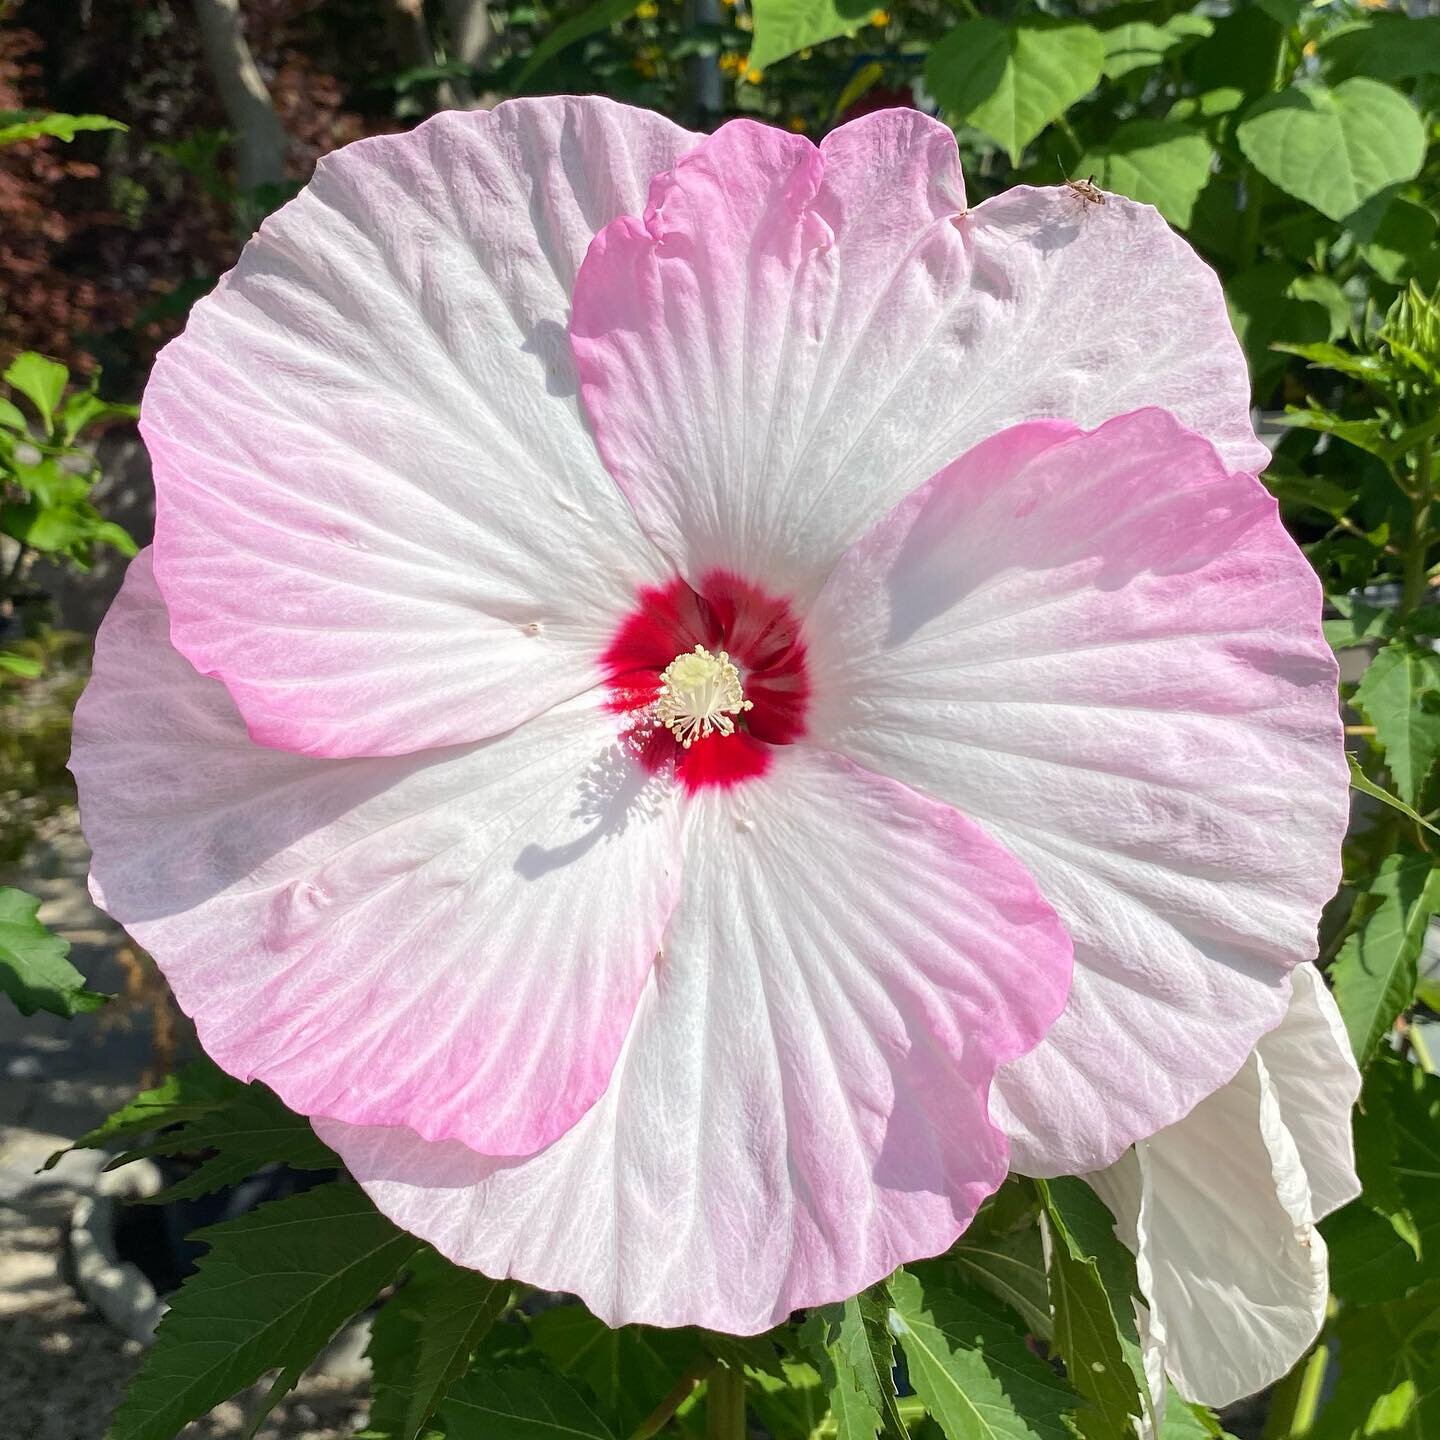 These beloved beauties have had heads turning the past few weeks with their mid-summer blooms 🌸 The perennial hibiscus aka &lsquo;Rose of Sharon&rsquo; are hardy perennials that you can expect blooming all August through September long. 

They range